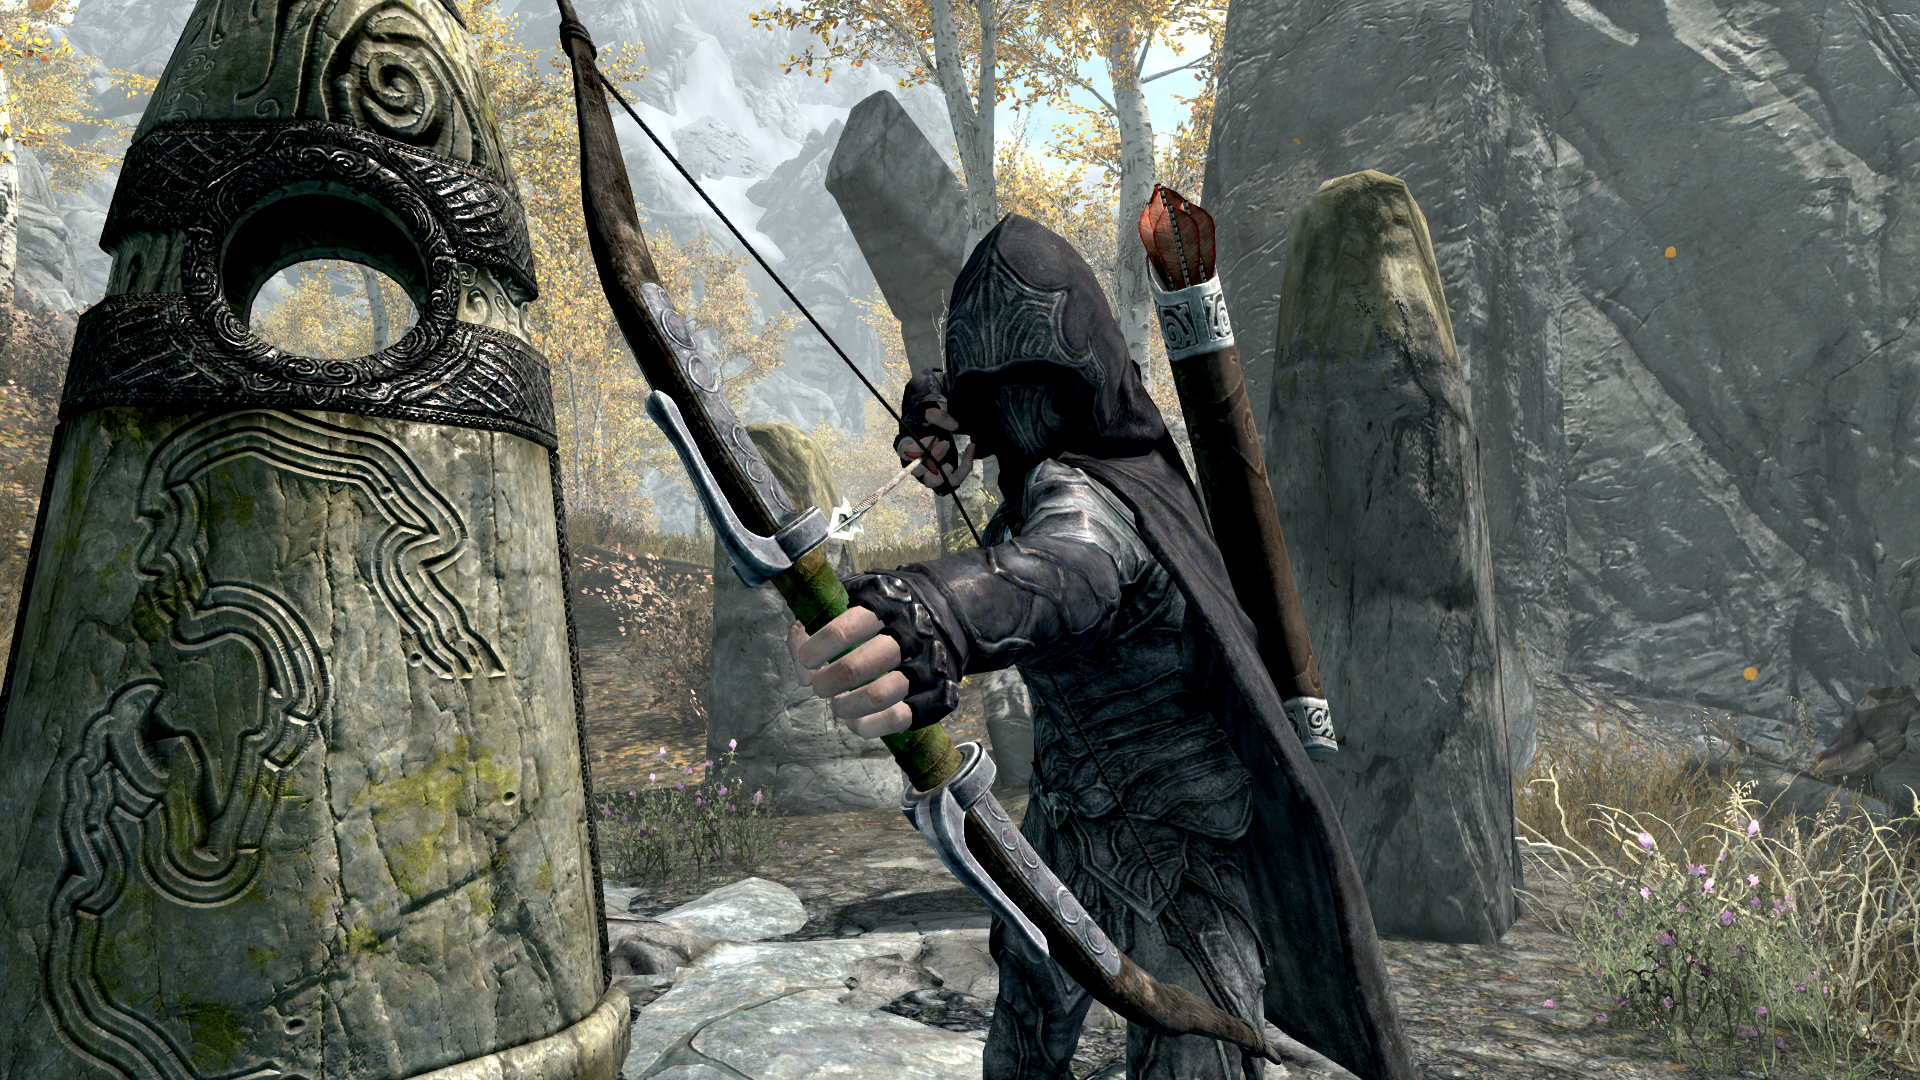 Skyrim Bow of Shadows equipped by an assassin within Riften woods area.